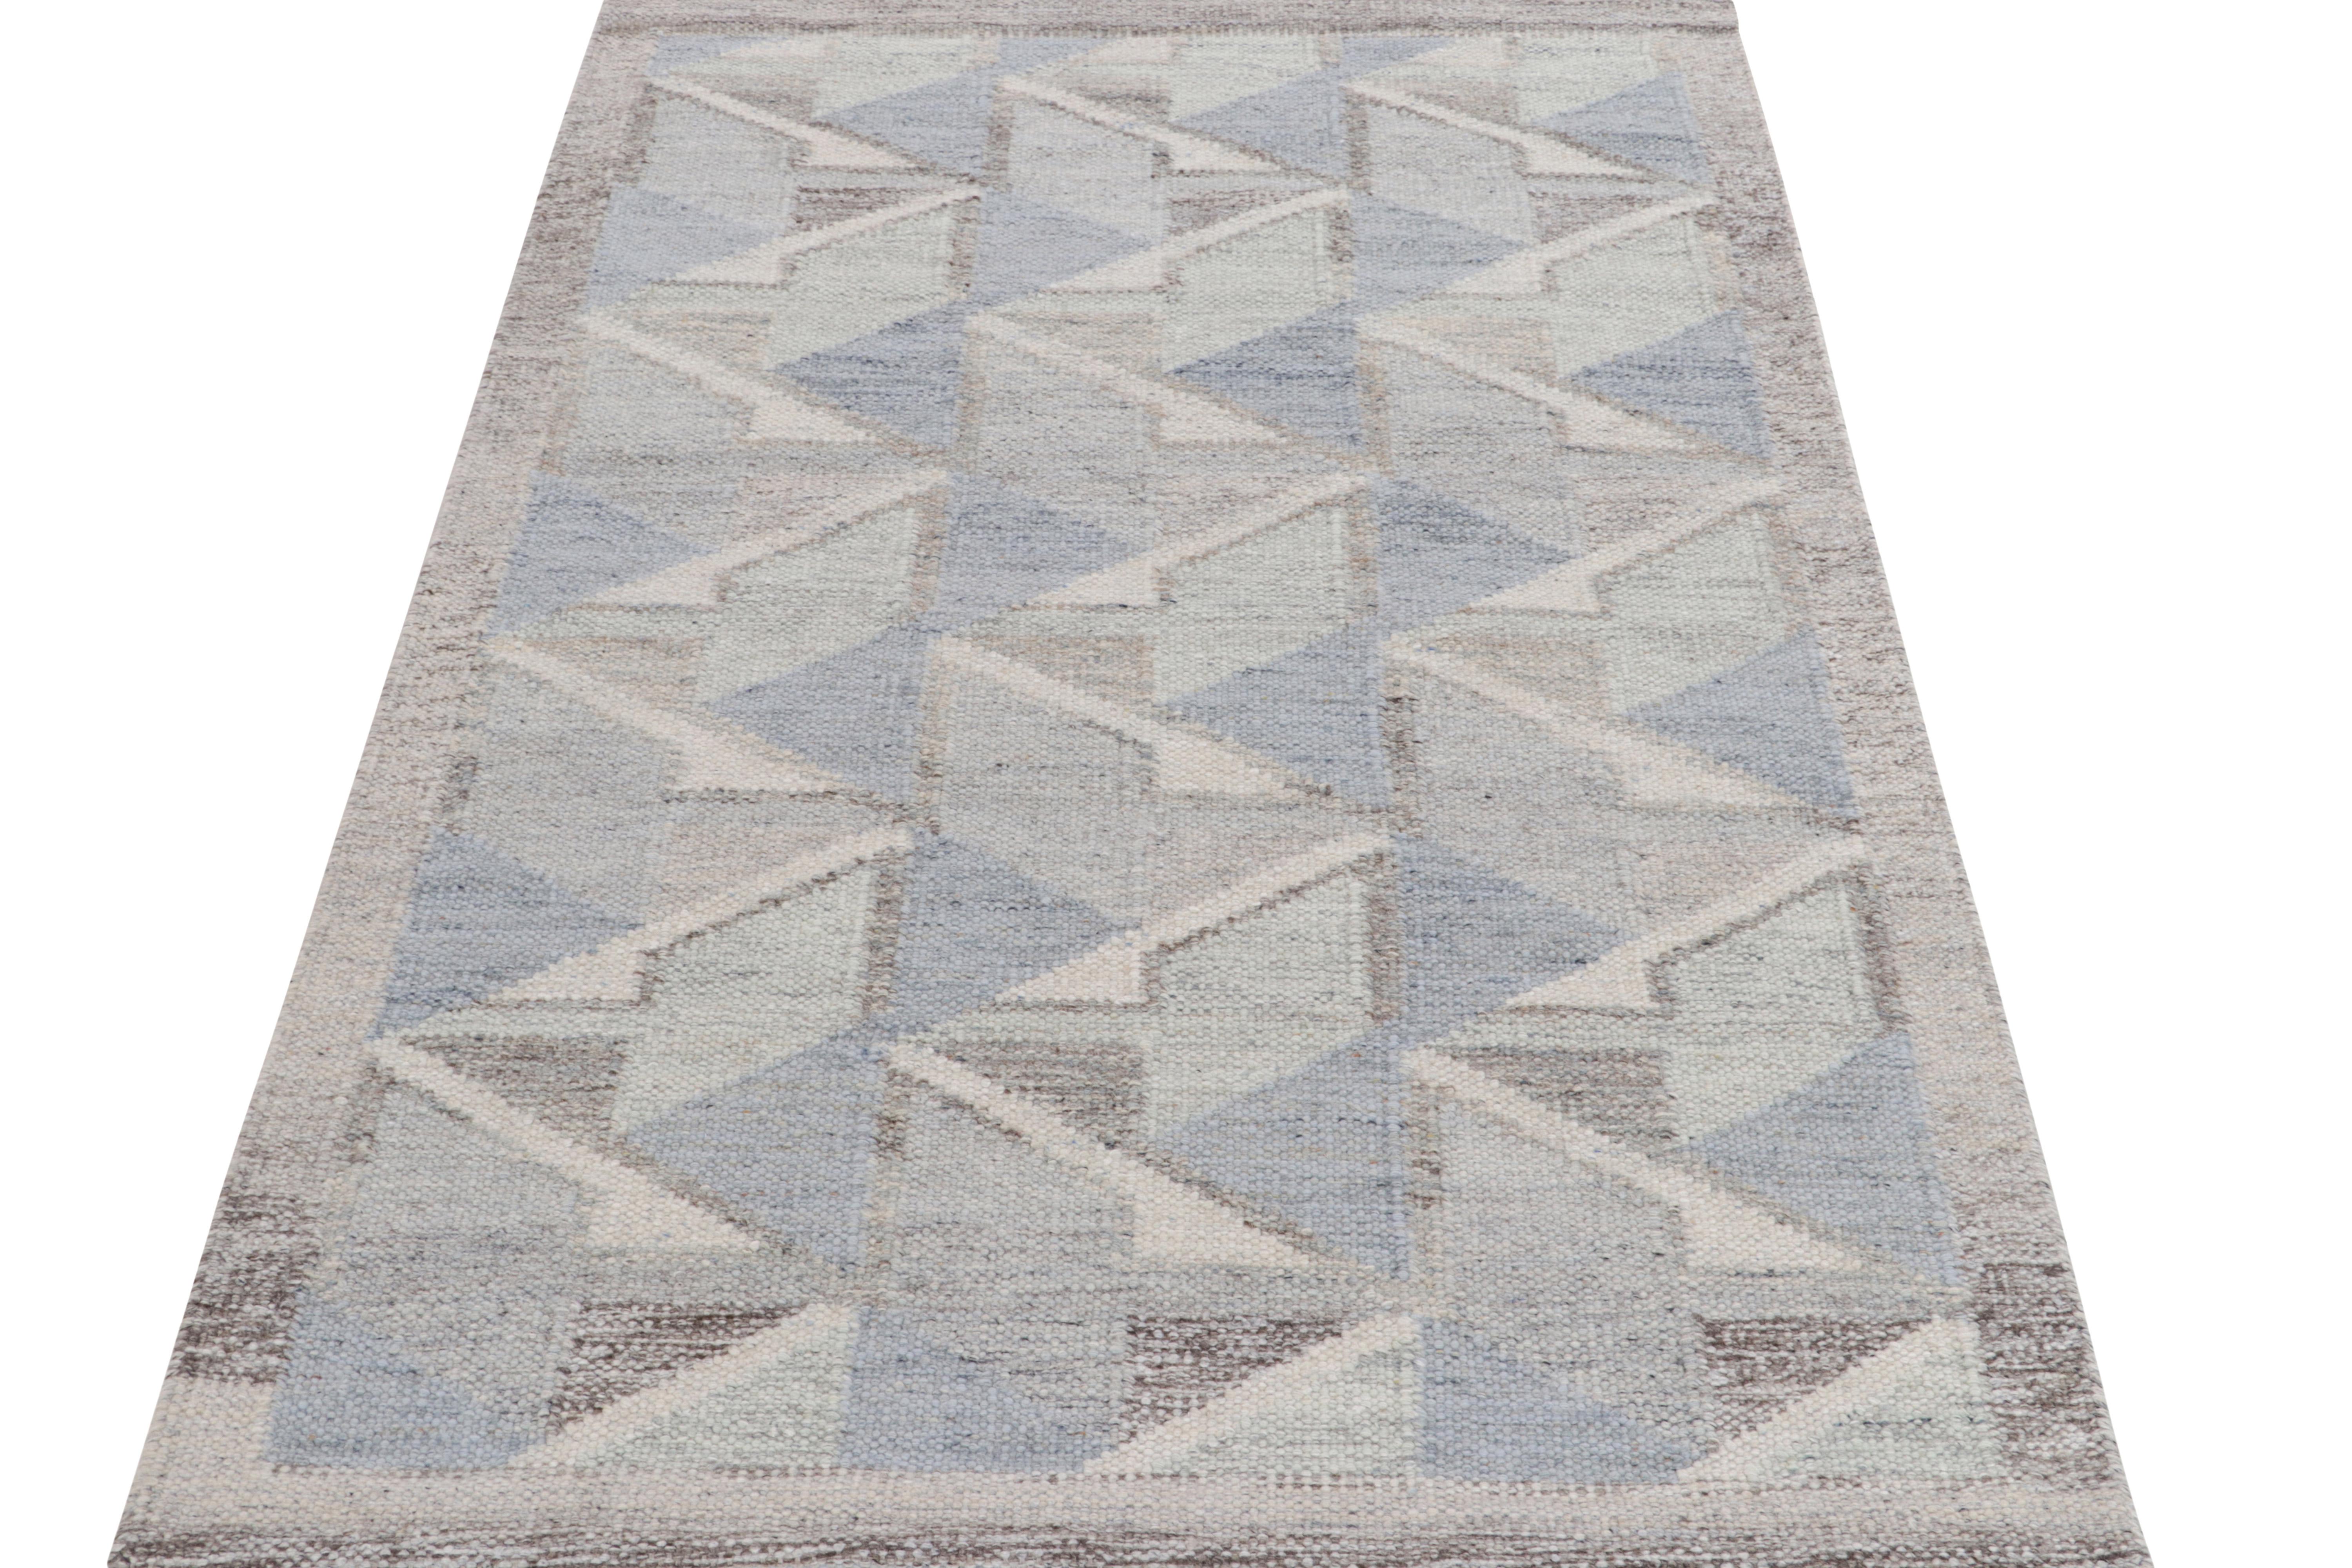 Rug & Kilim’s innovative take on Scandinavian Kilims, from our celebrated flatweave line of the titular award-winning collection. This 4x6 rug exemplifies the finesse of Swedish aesthetics with a smart geometric pattern casting an 3D impression in